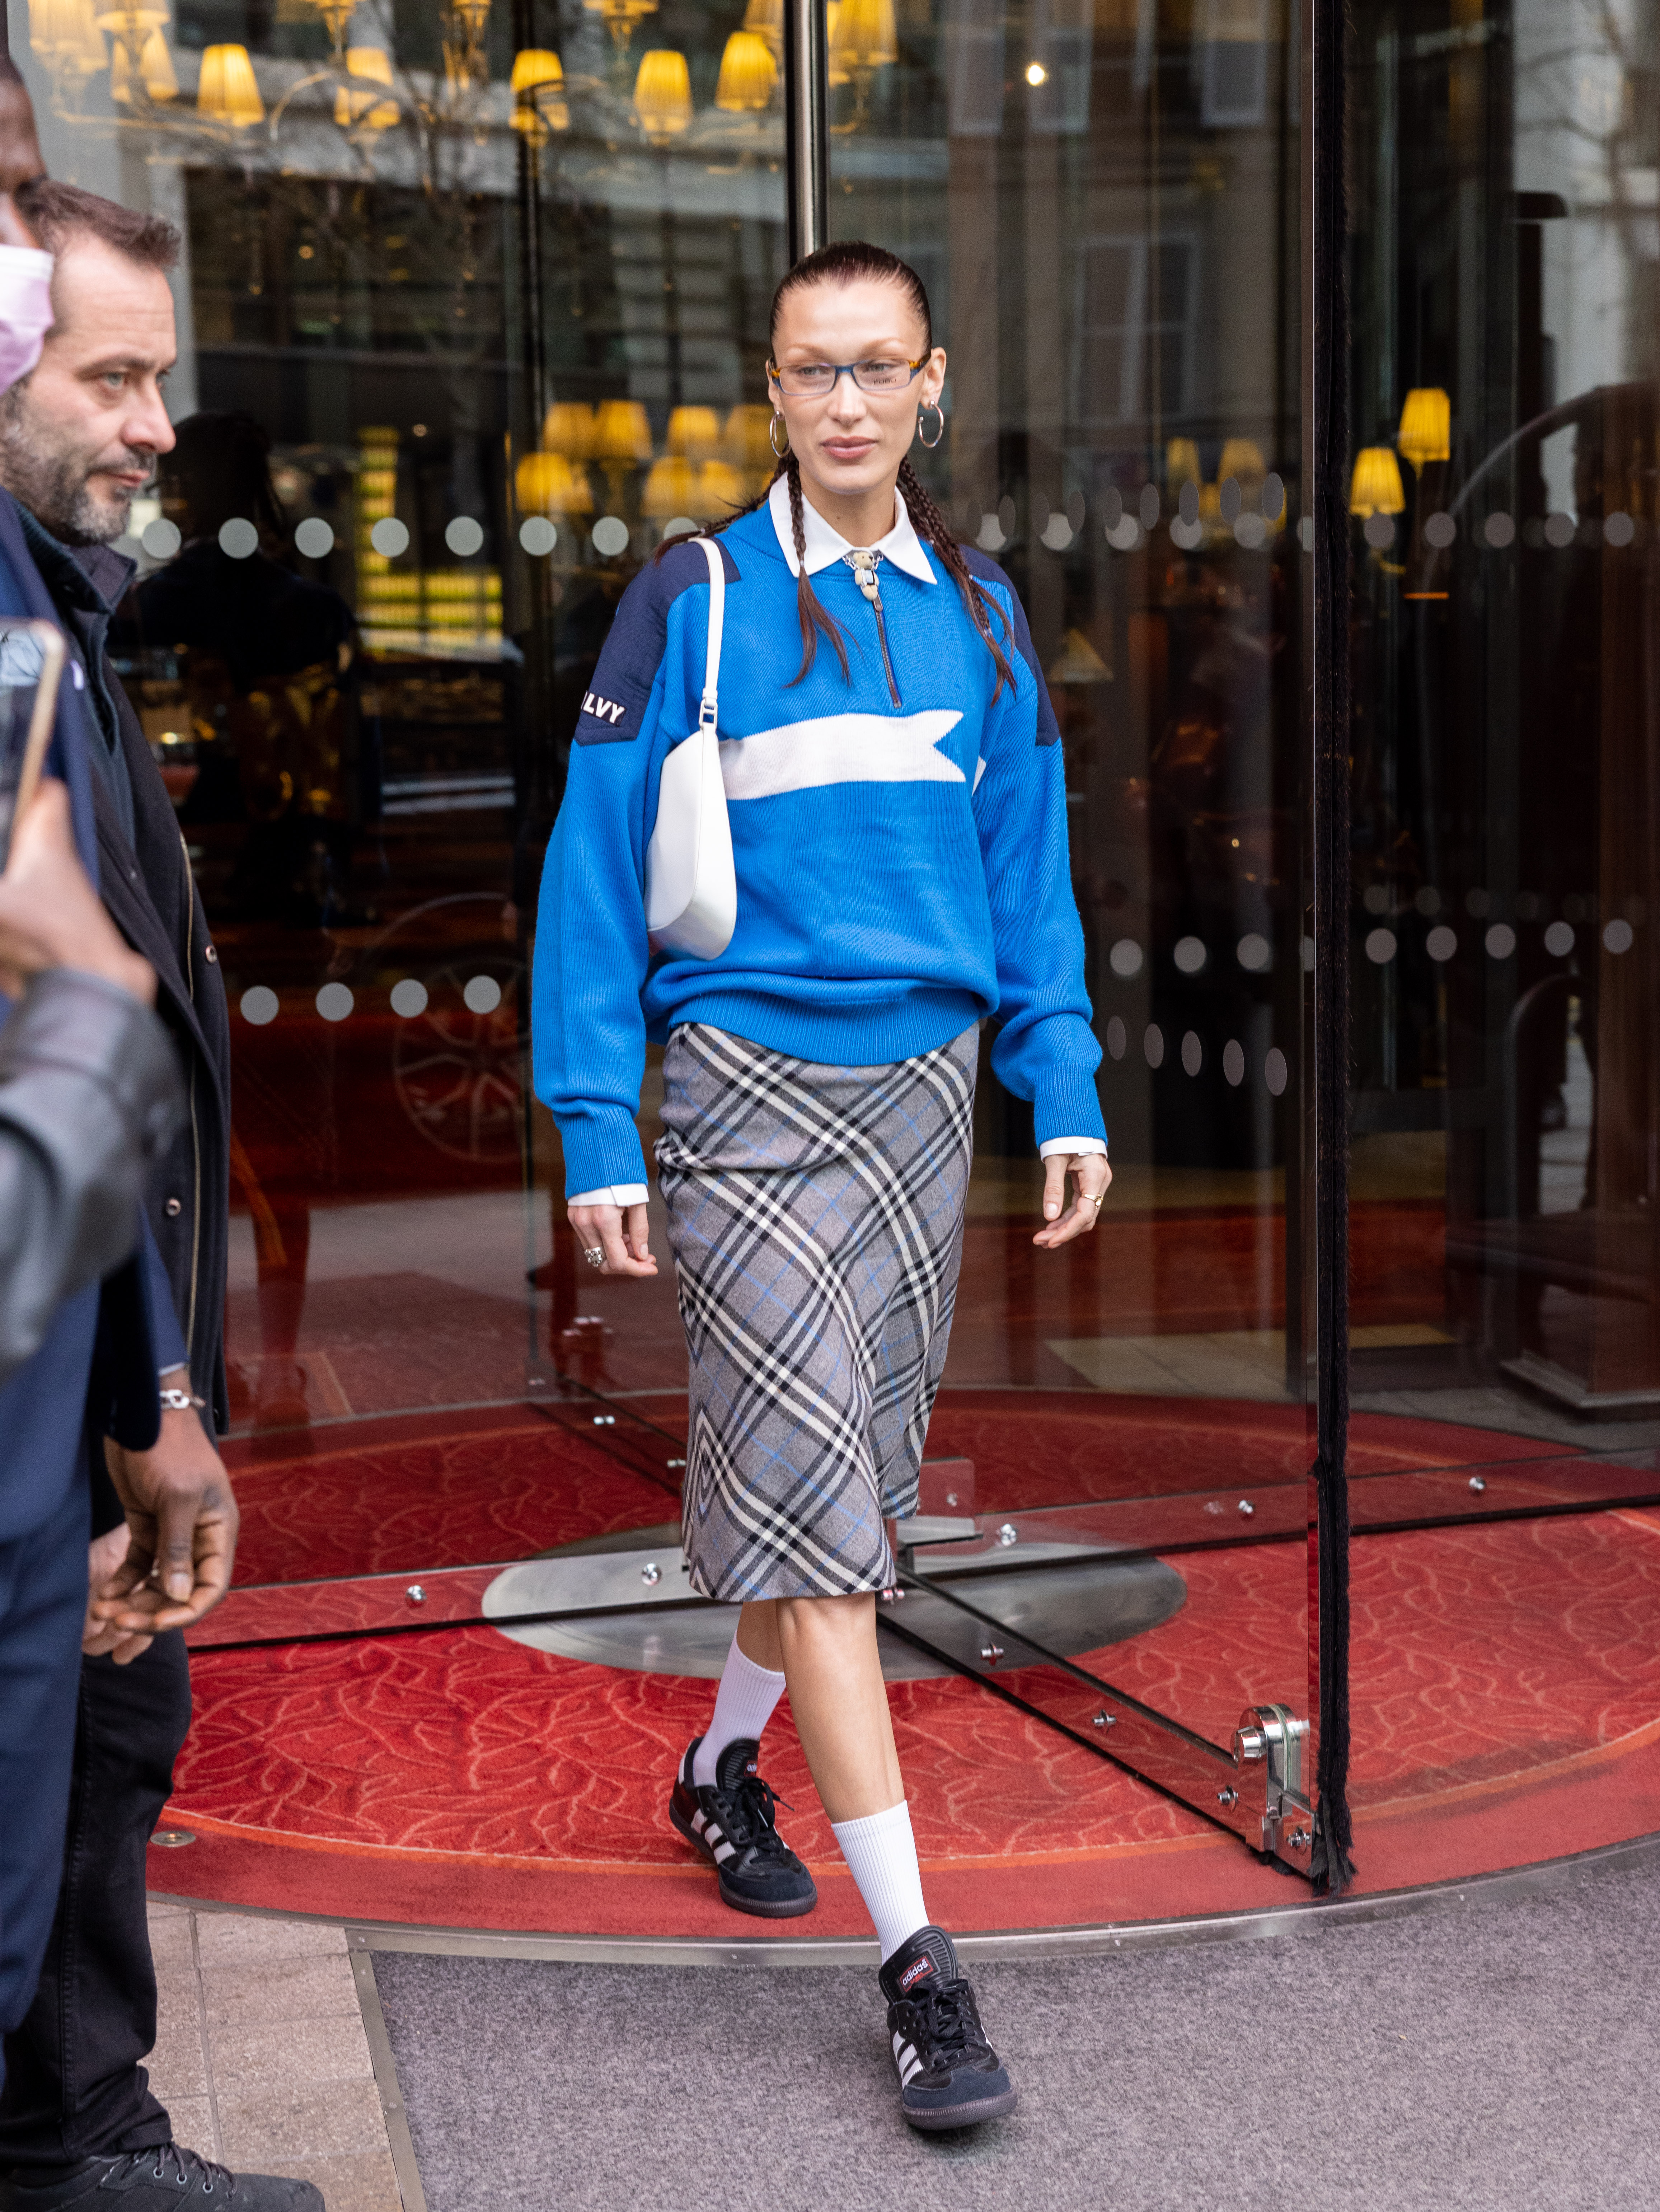 Bella Hadid is seen leaving the hotel during the Fashion Week on March 04, 2022 in Paris, France